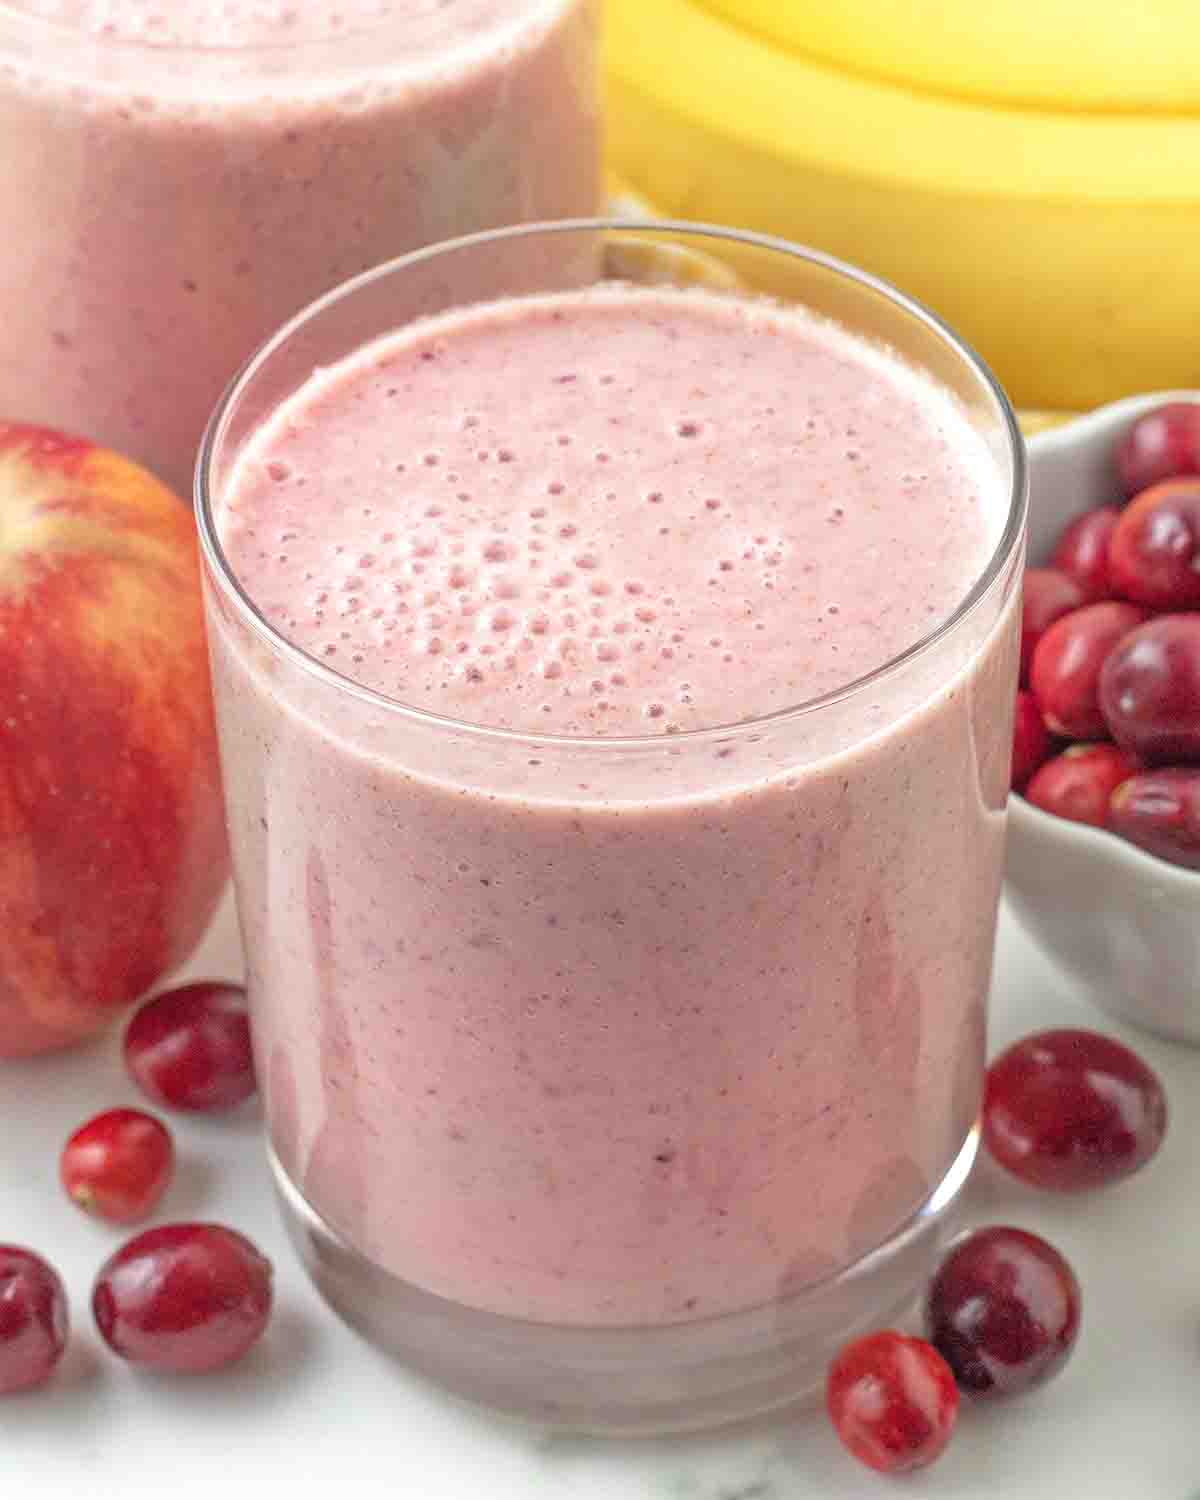 A glass of filled with cranberry smoothie, fresh cranberries, a fresh apple and bananas sit around the glass.